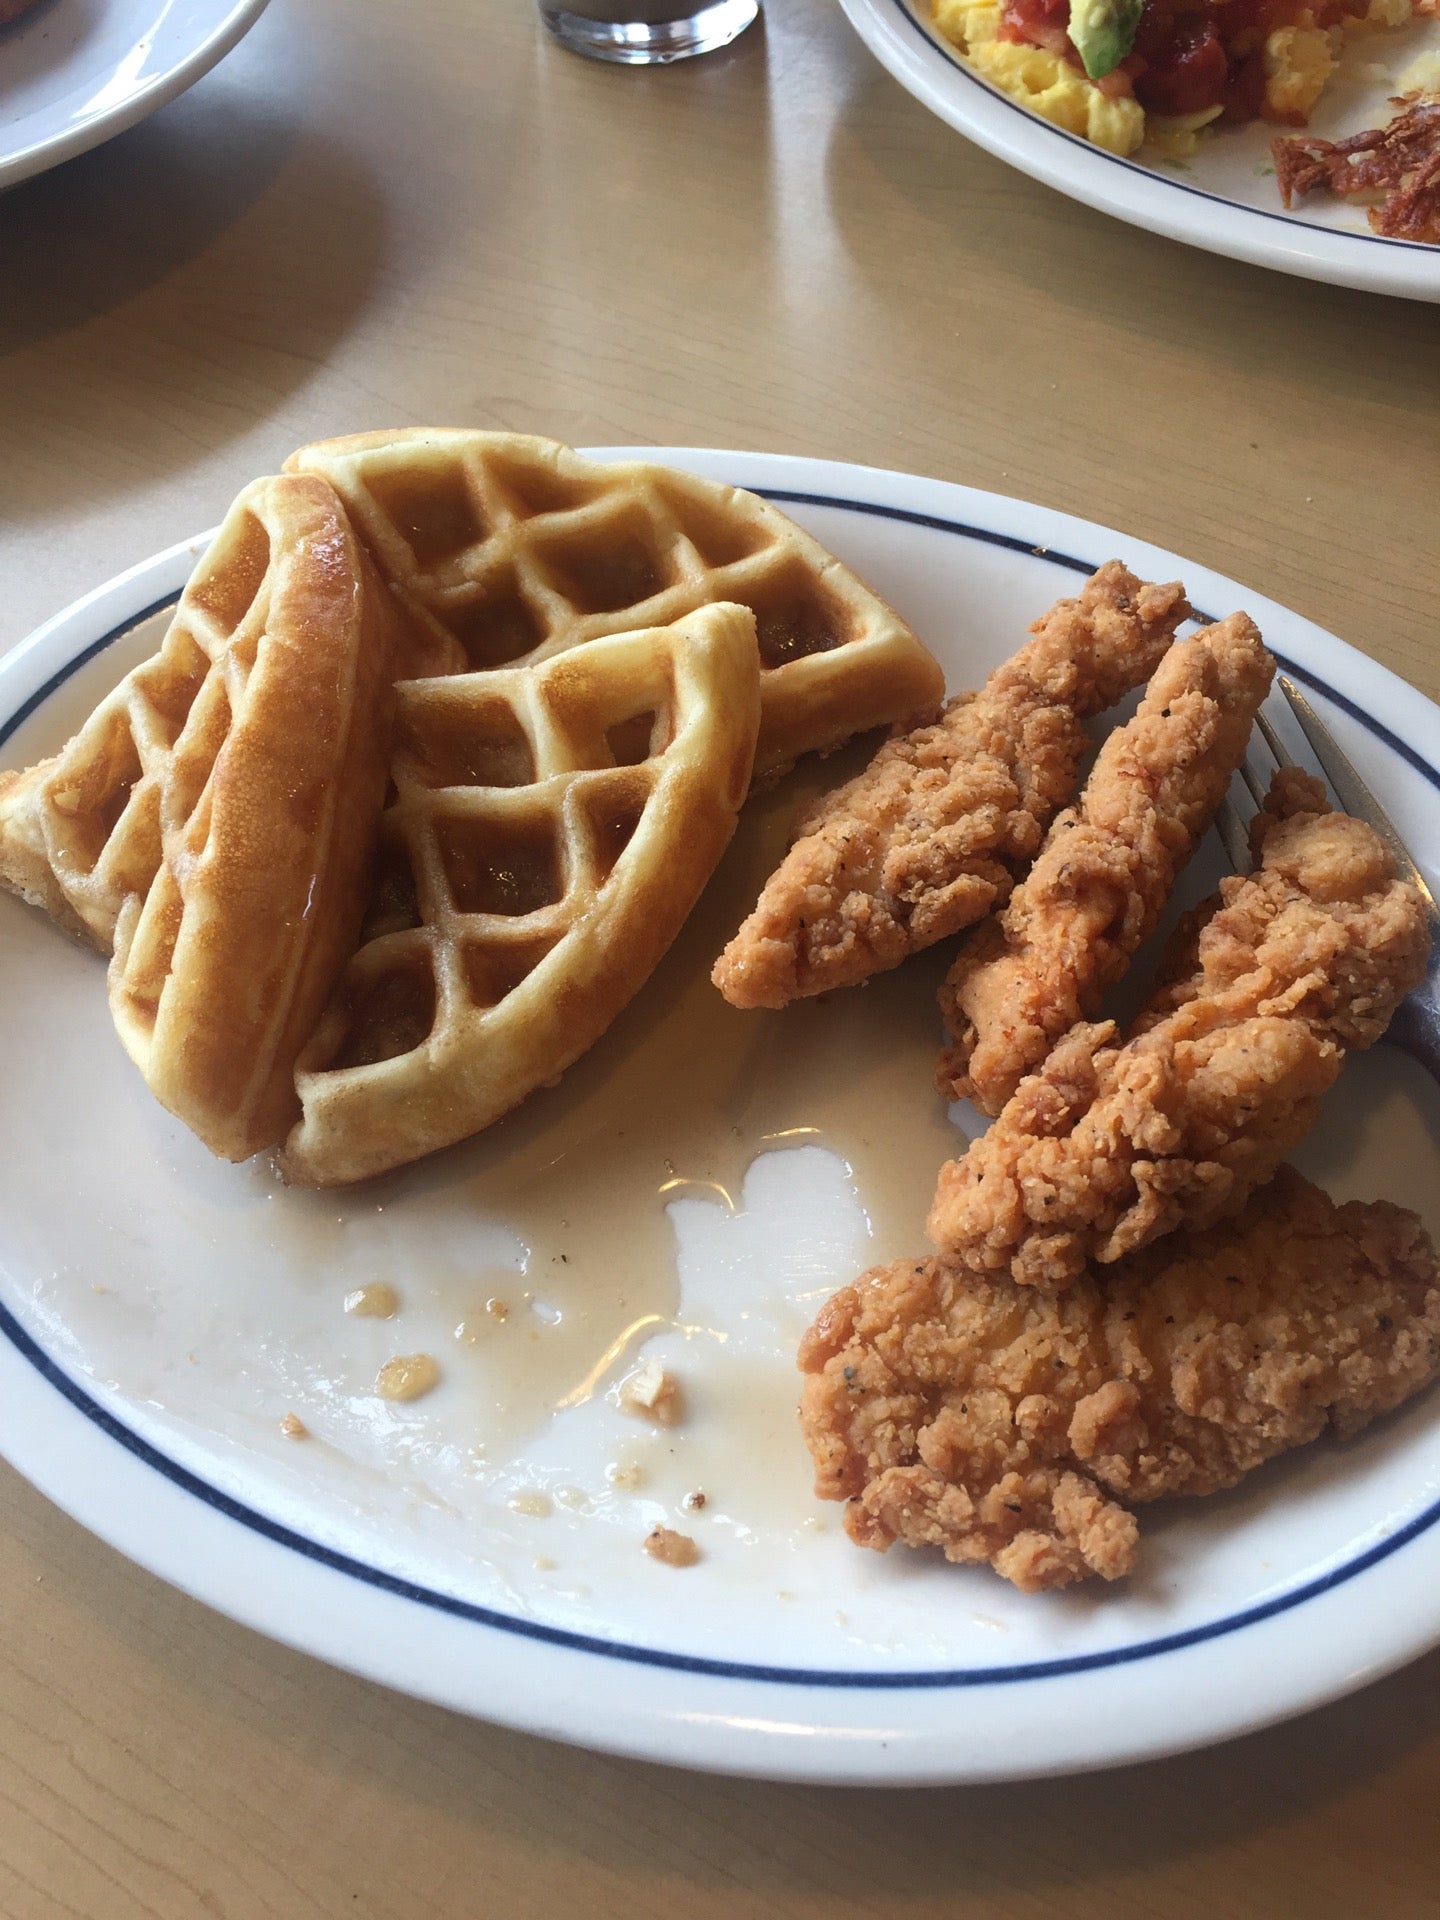 Breakfast, the American Way - Review of Ihop, New York City, NY